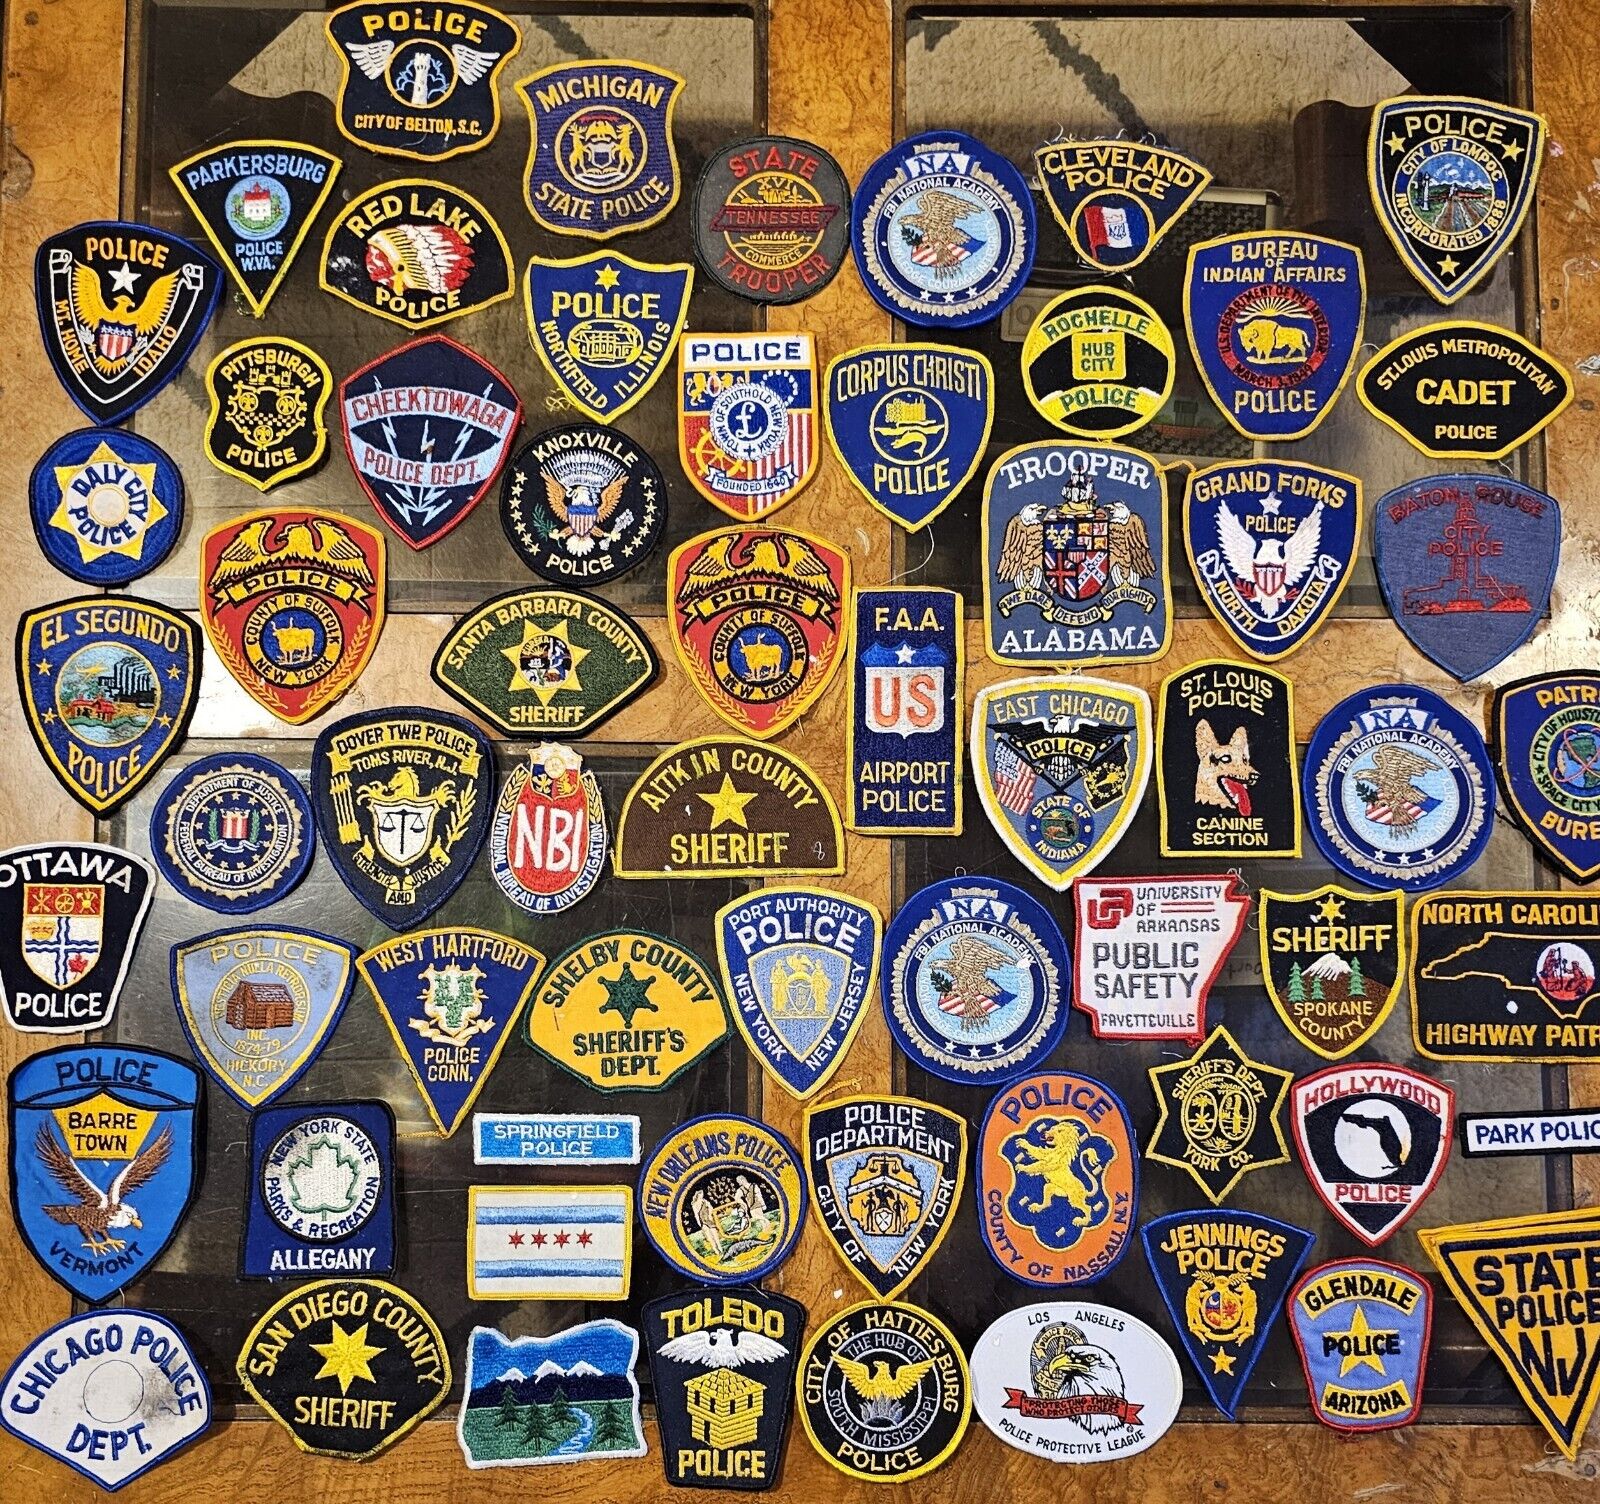 Huge Patch Lot of 60 Law Enforcement Police Sheriff FAA Fight Rescue Patches